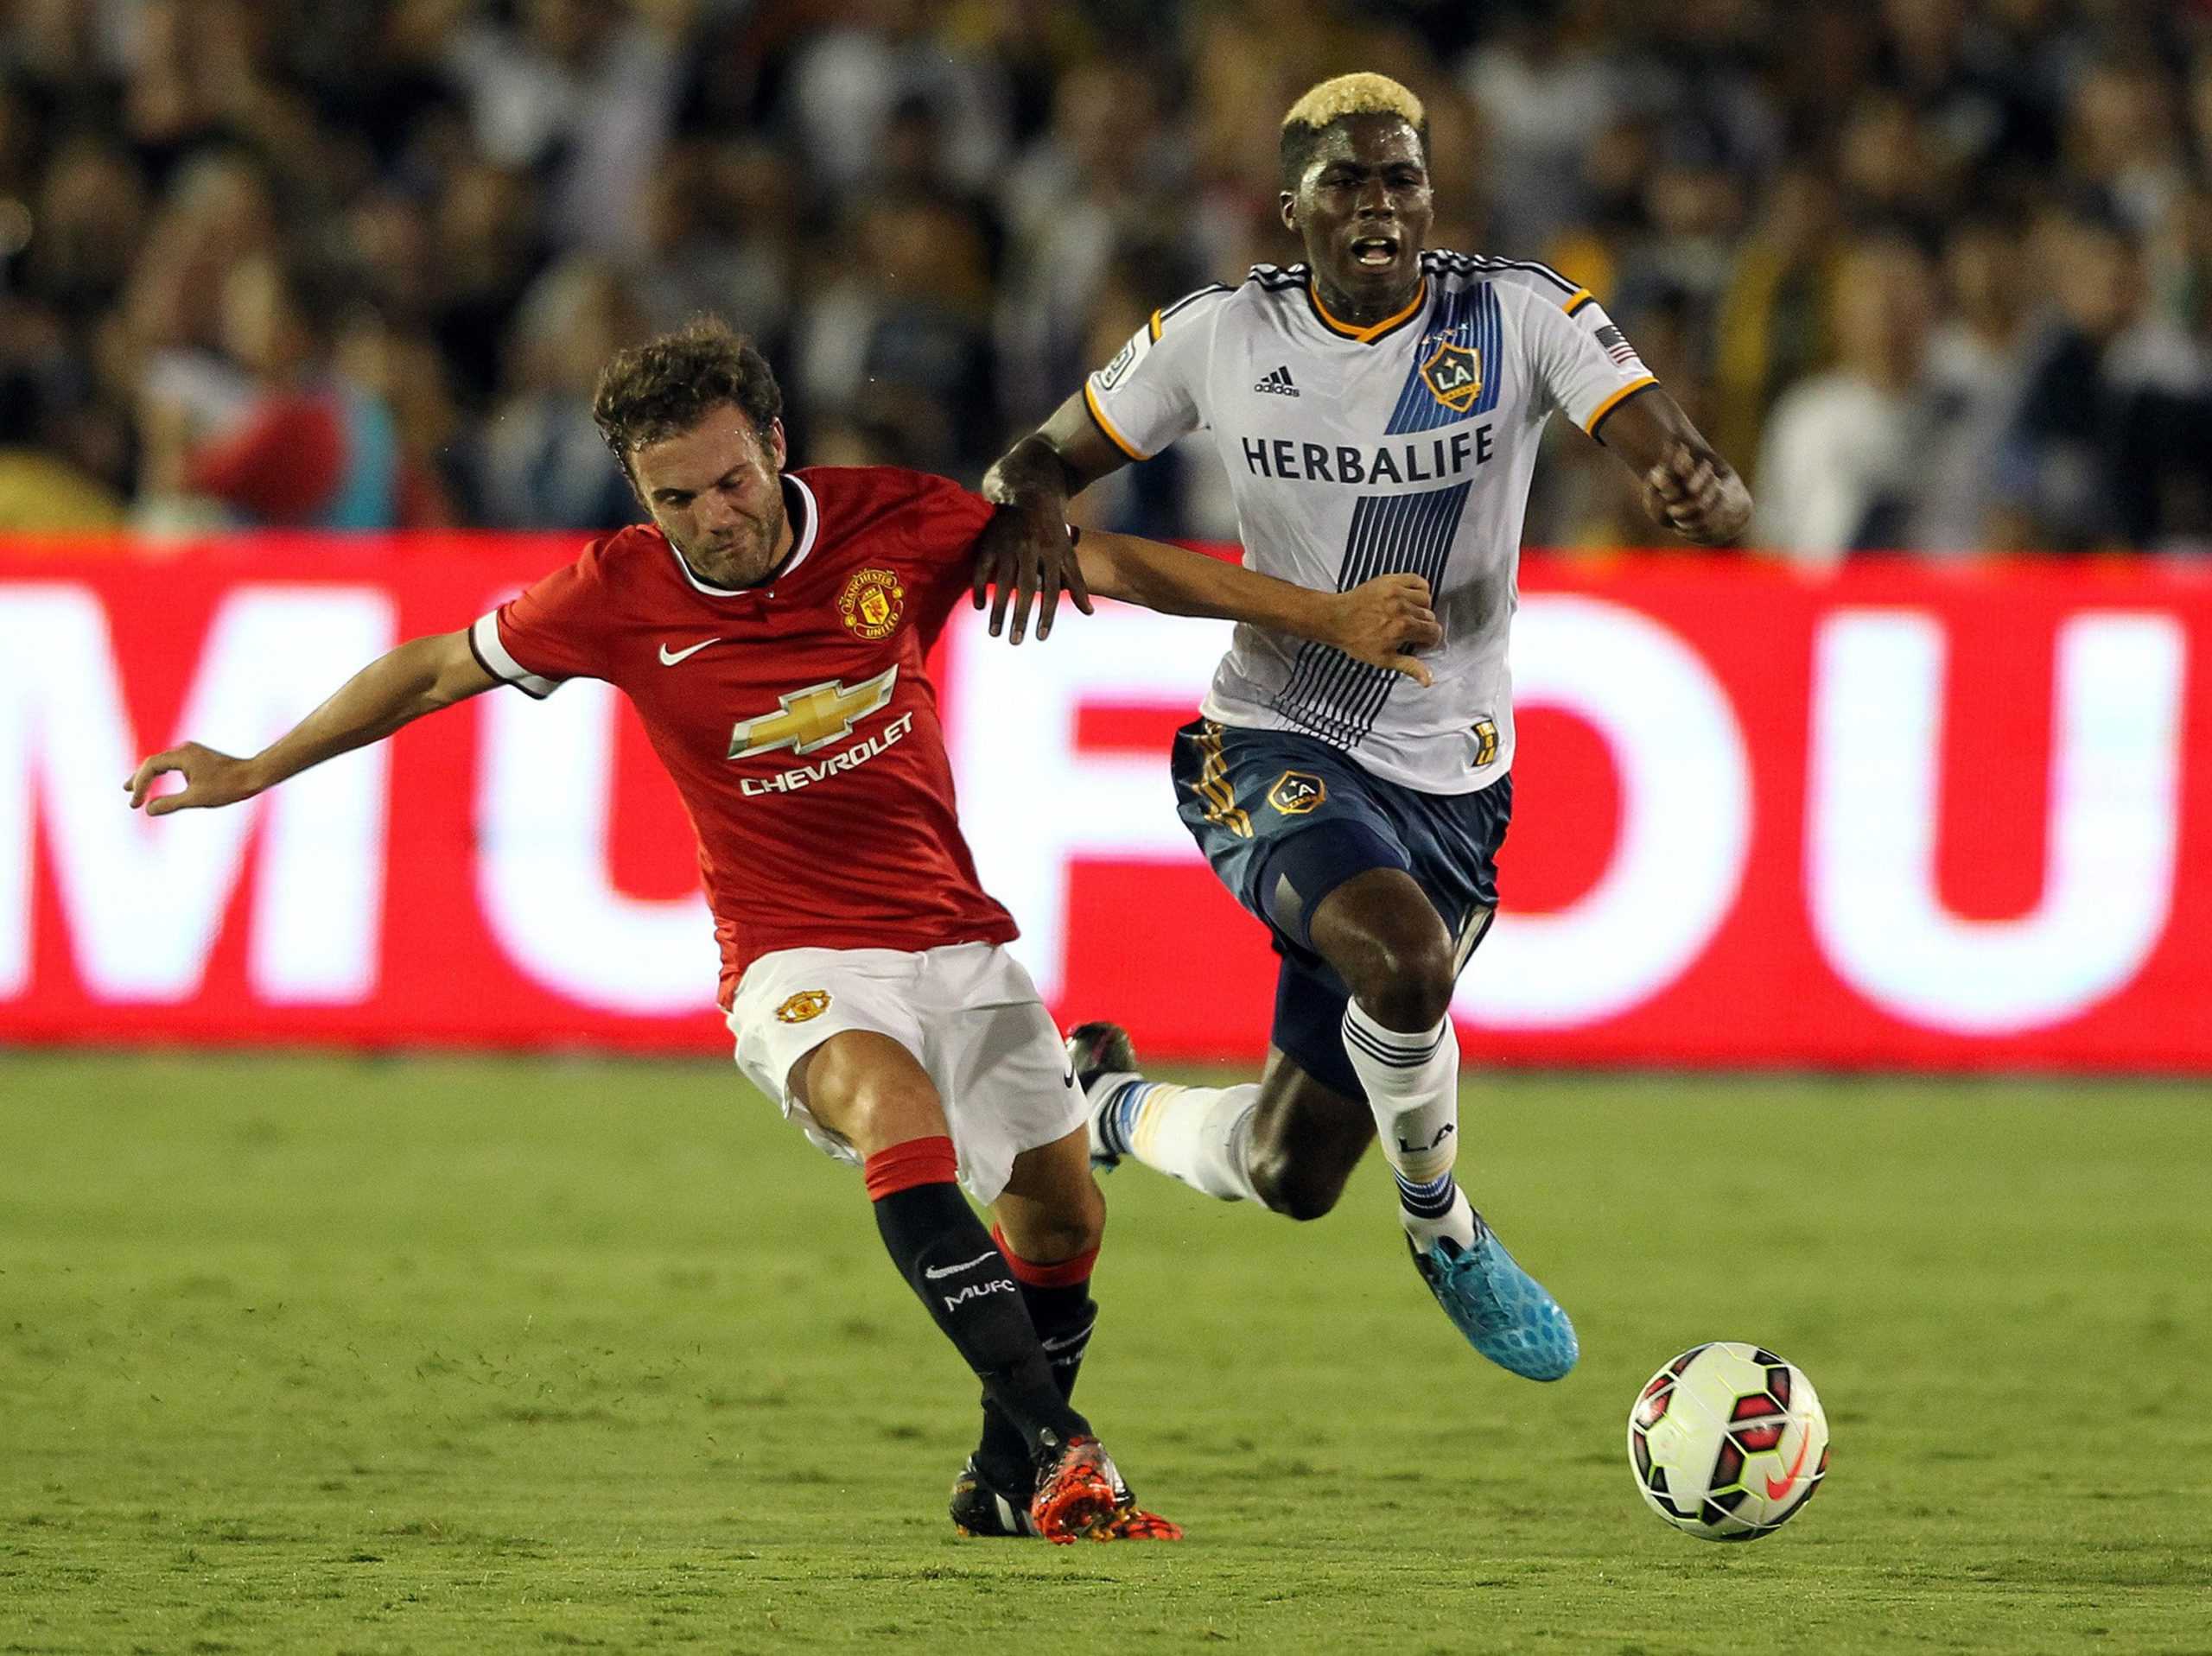 Manchester Uniteds Juan Mata, left, and the Los Angeles Galaxys Gyasi Zardes fight for the ball in an exhibition game at the Rose Bowl in Pasadena, Calif., on Wednesday, July 23, 2014. Manchester won, 7-0. (Rick Loomis/Los Angeles Times/MCT)